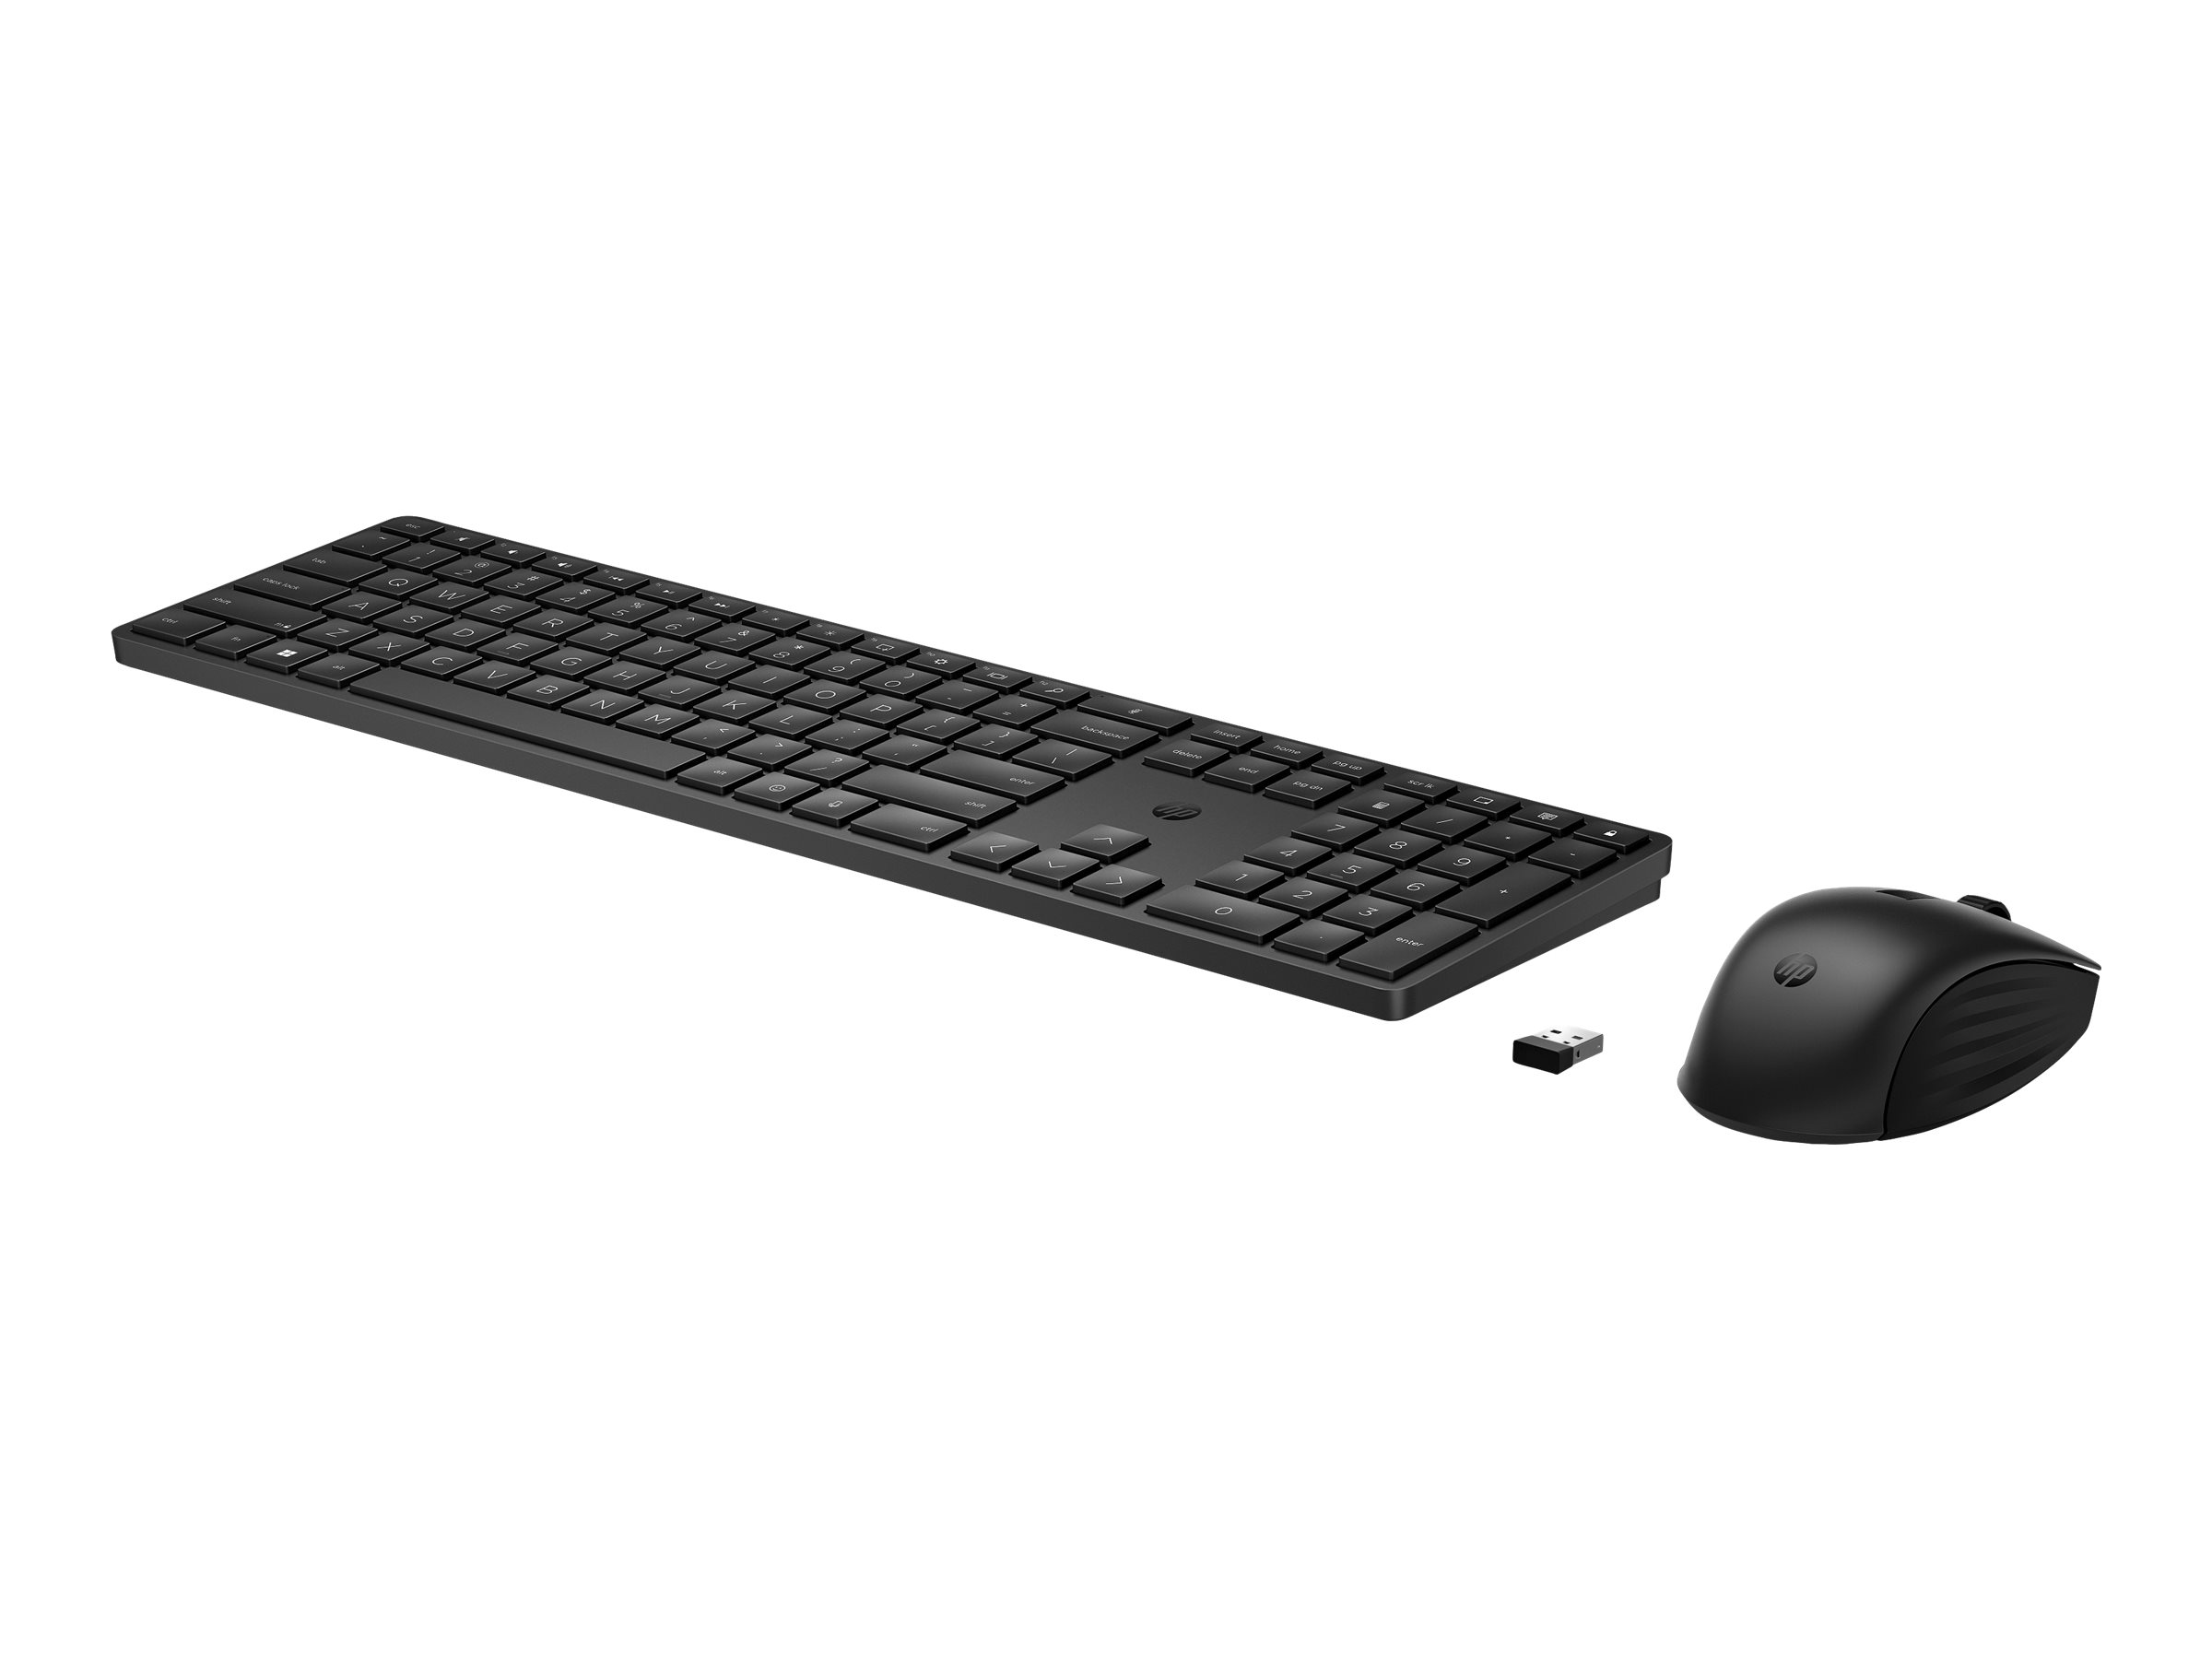 HP 650 Wireless Keyboard and Mouse (P) (4R016AA#ABD)